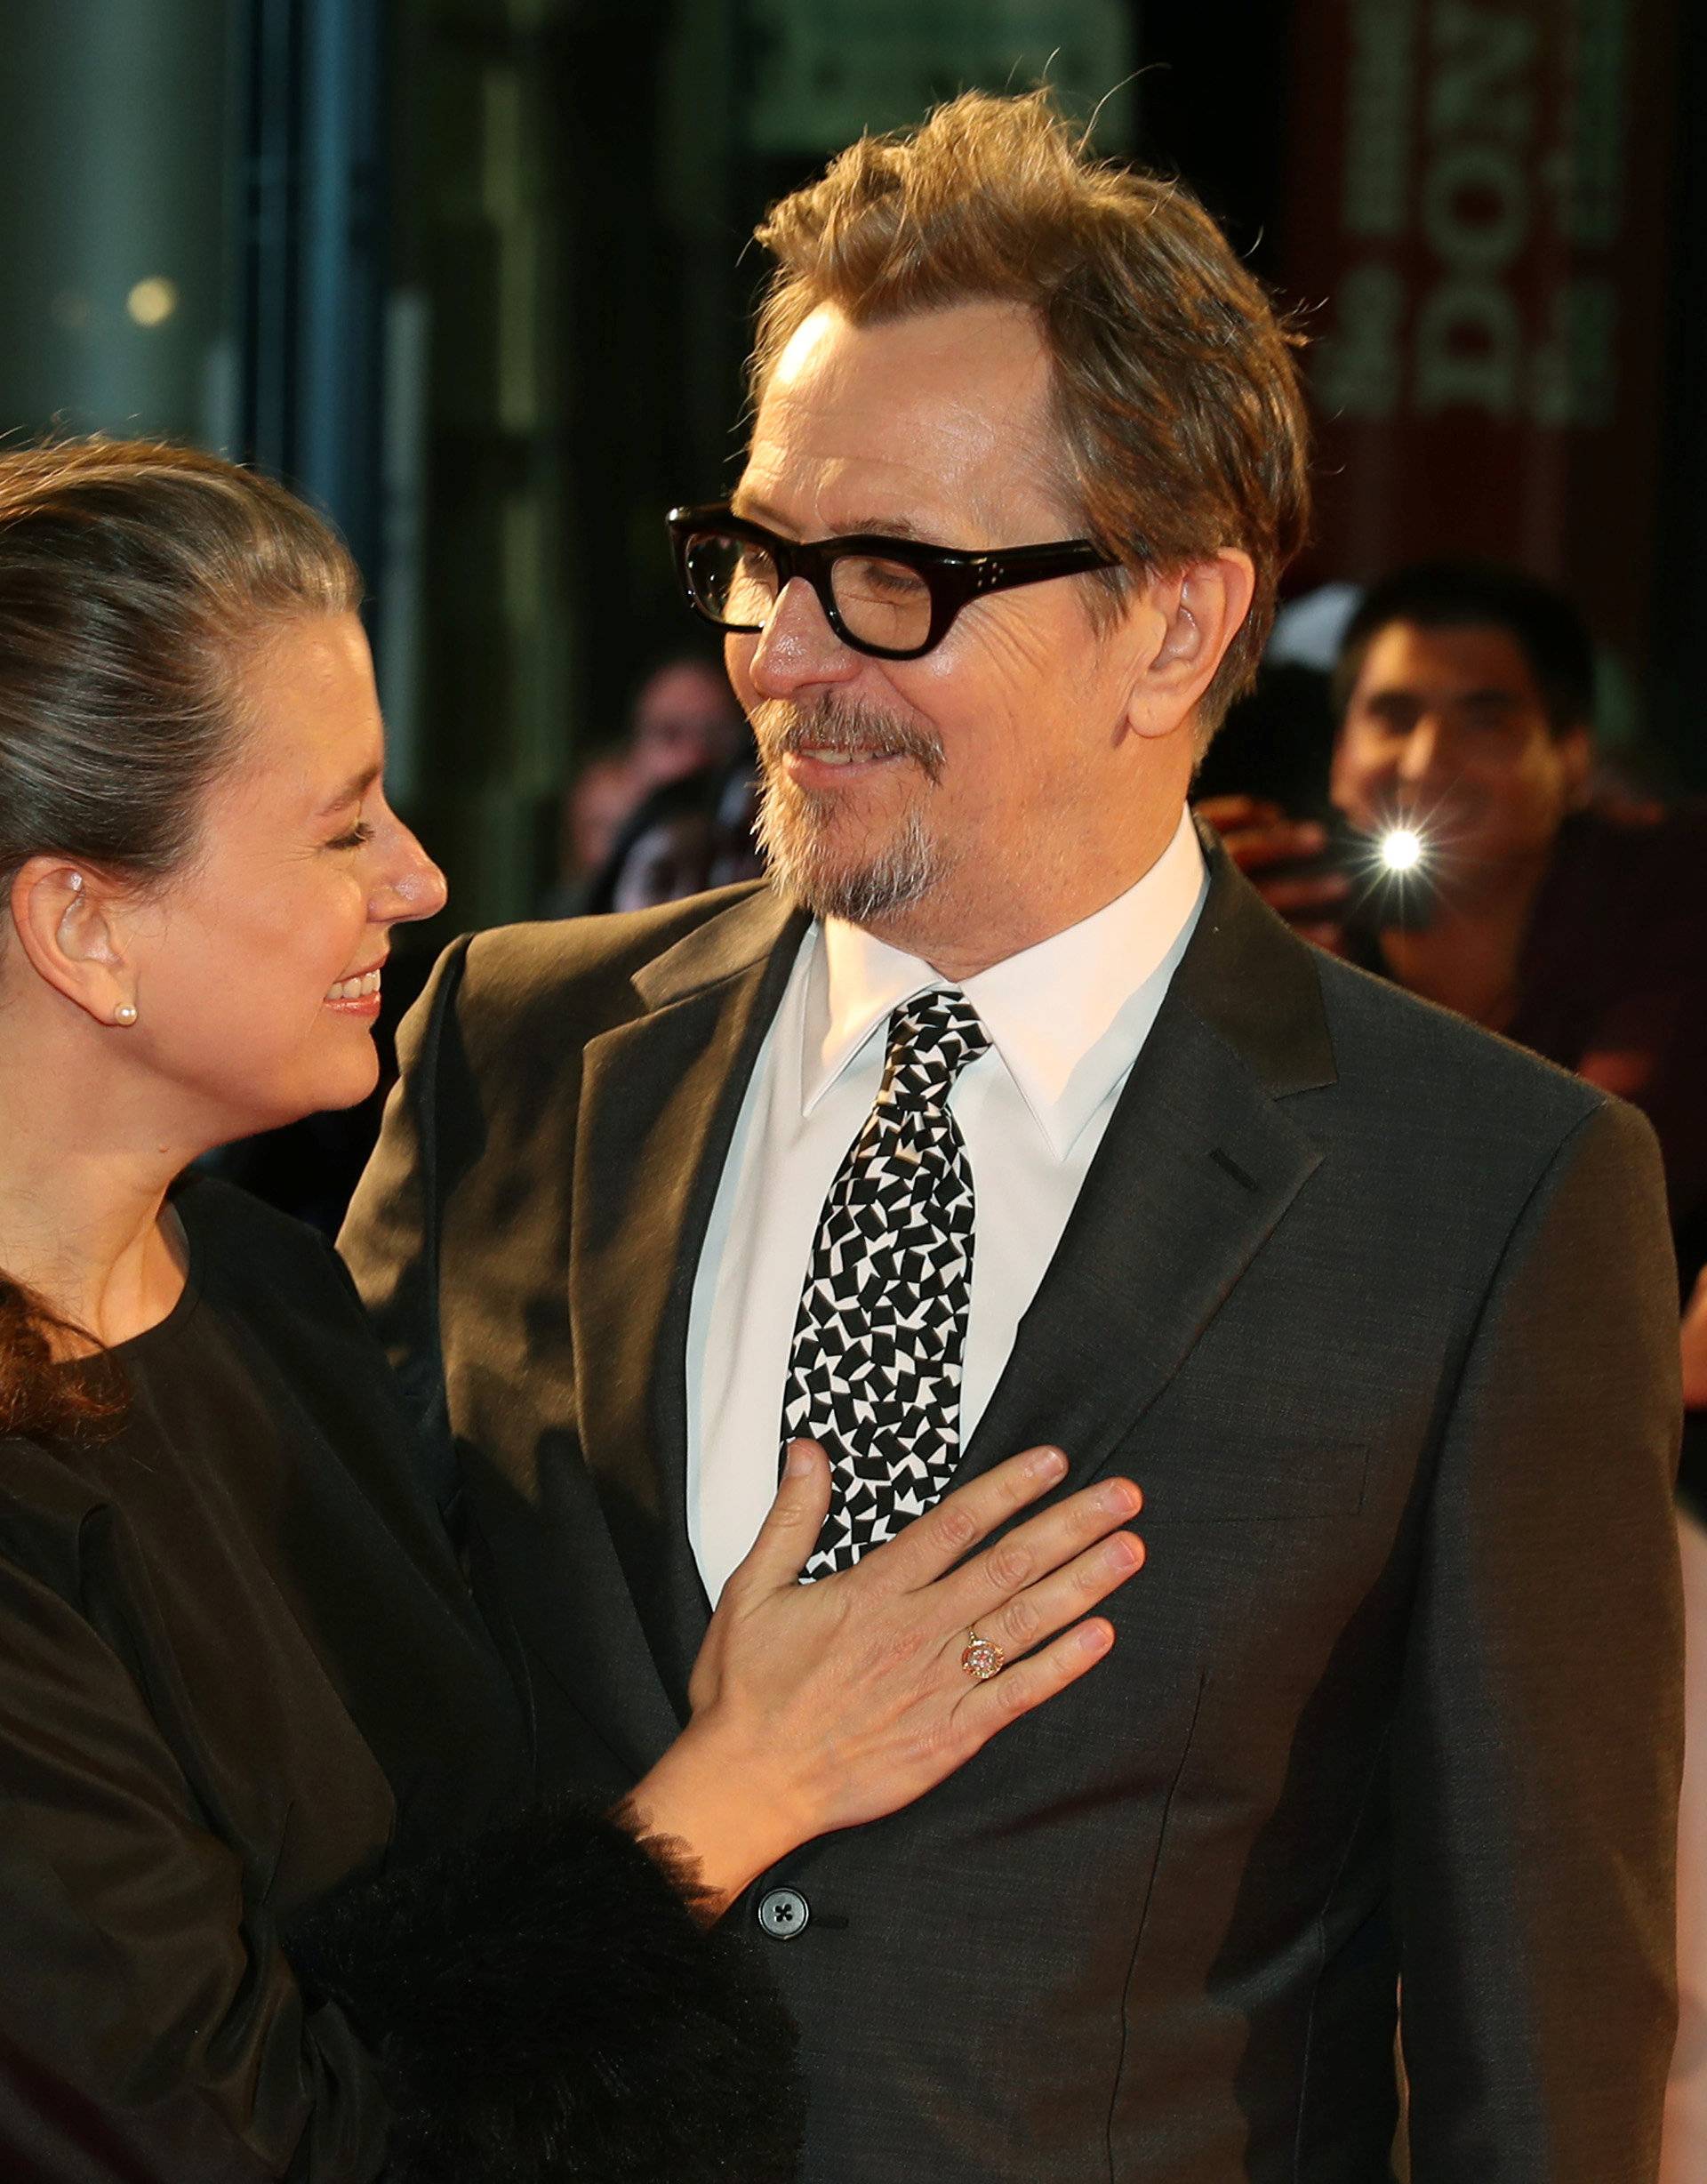 Actor Gary Oldman and his wife Gisele Schmidt arrive at the premiere of the film "Darkest Hour" at Toronto International Film Festival.